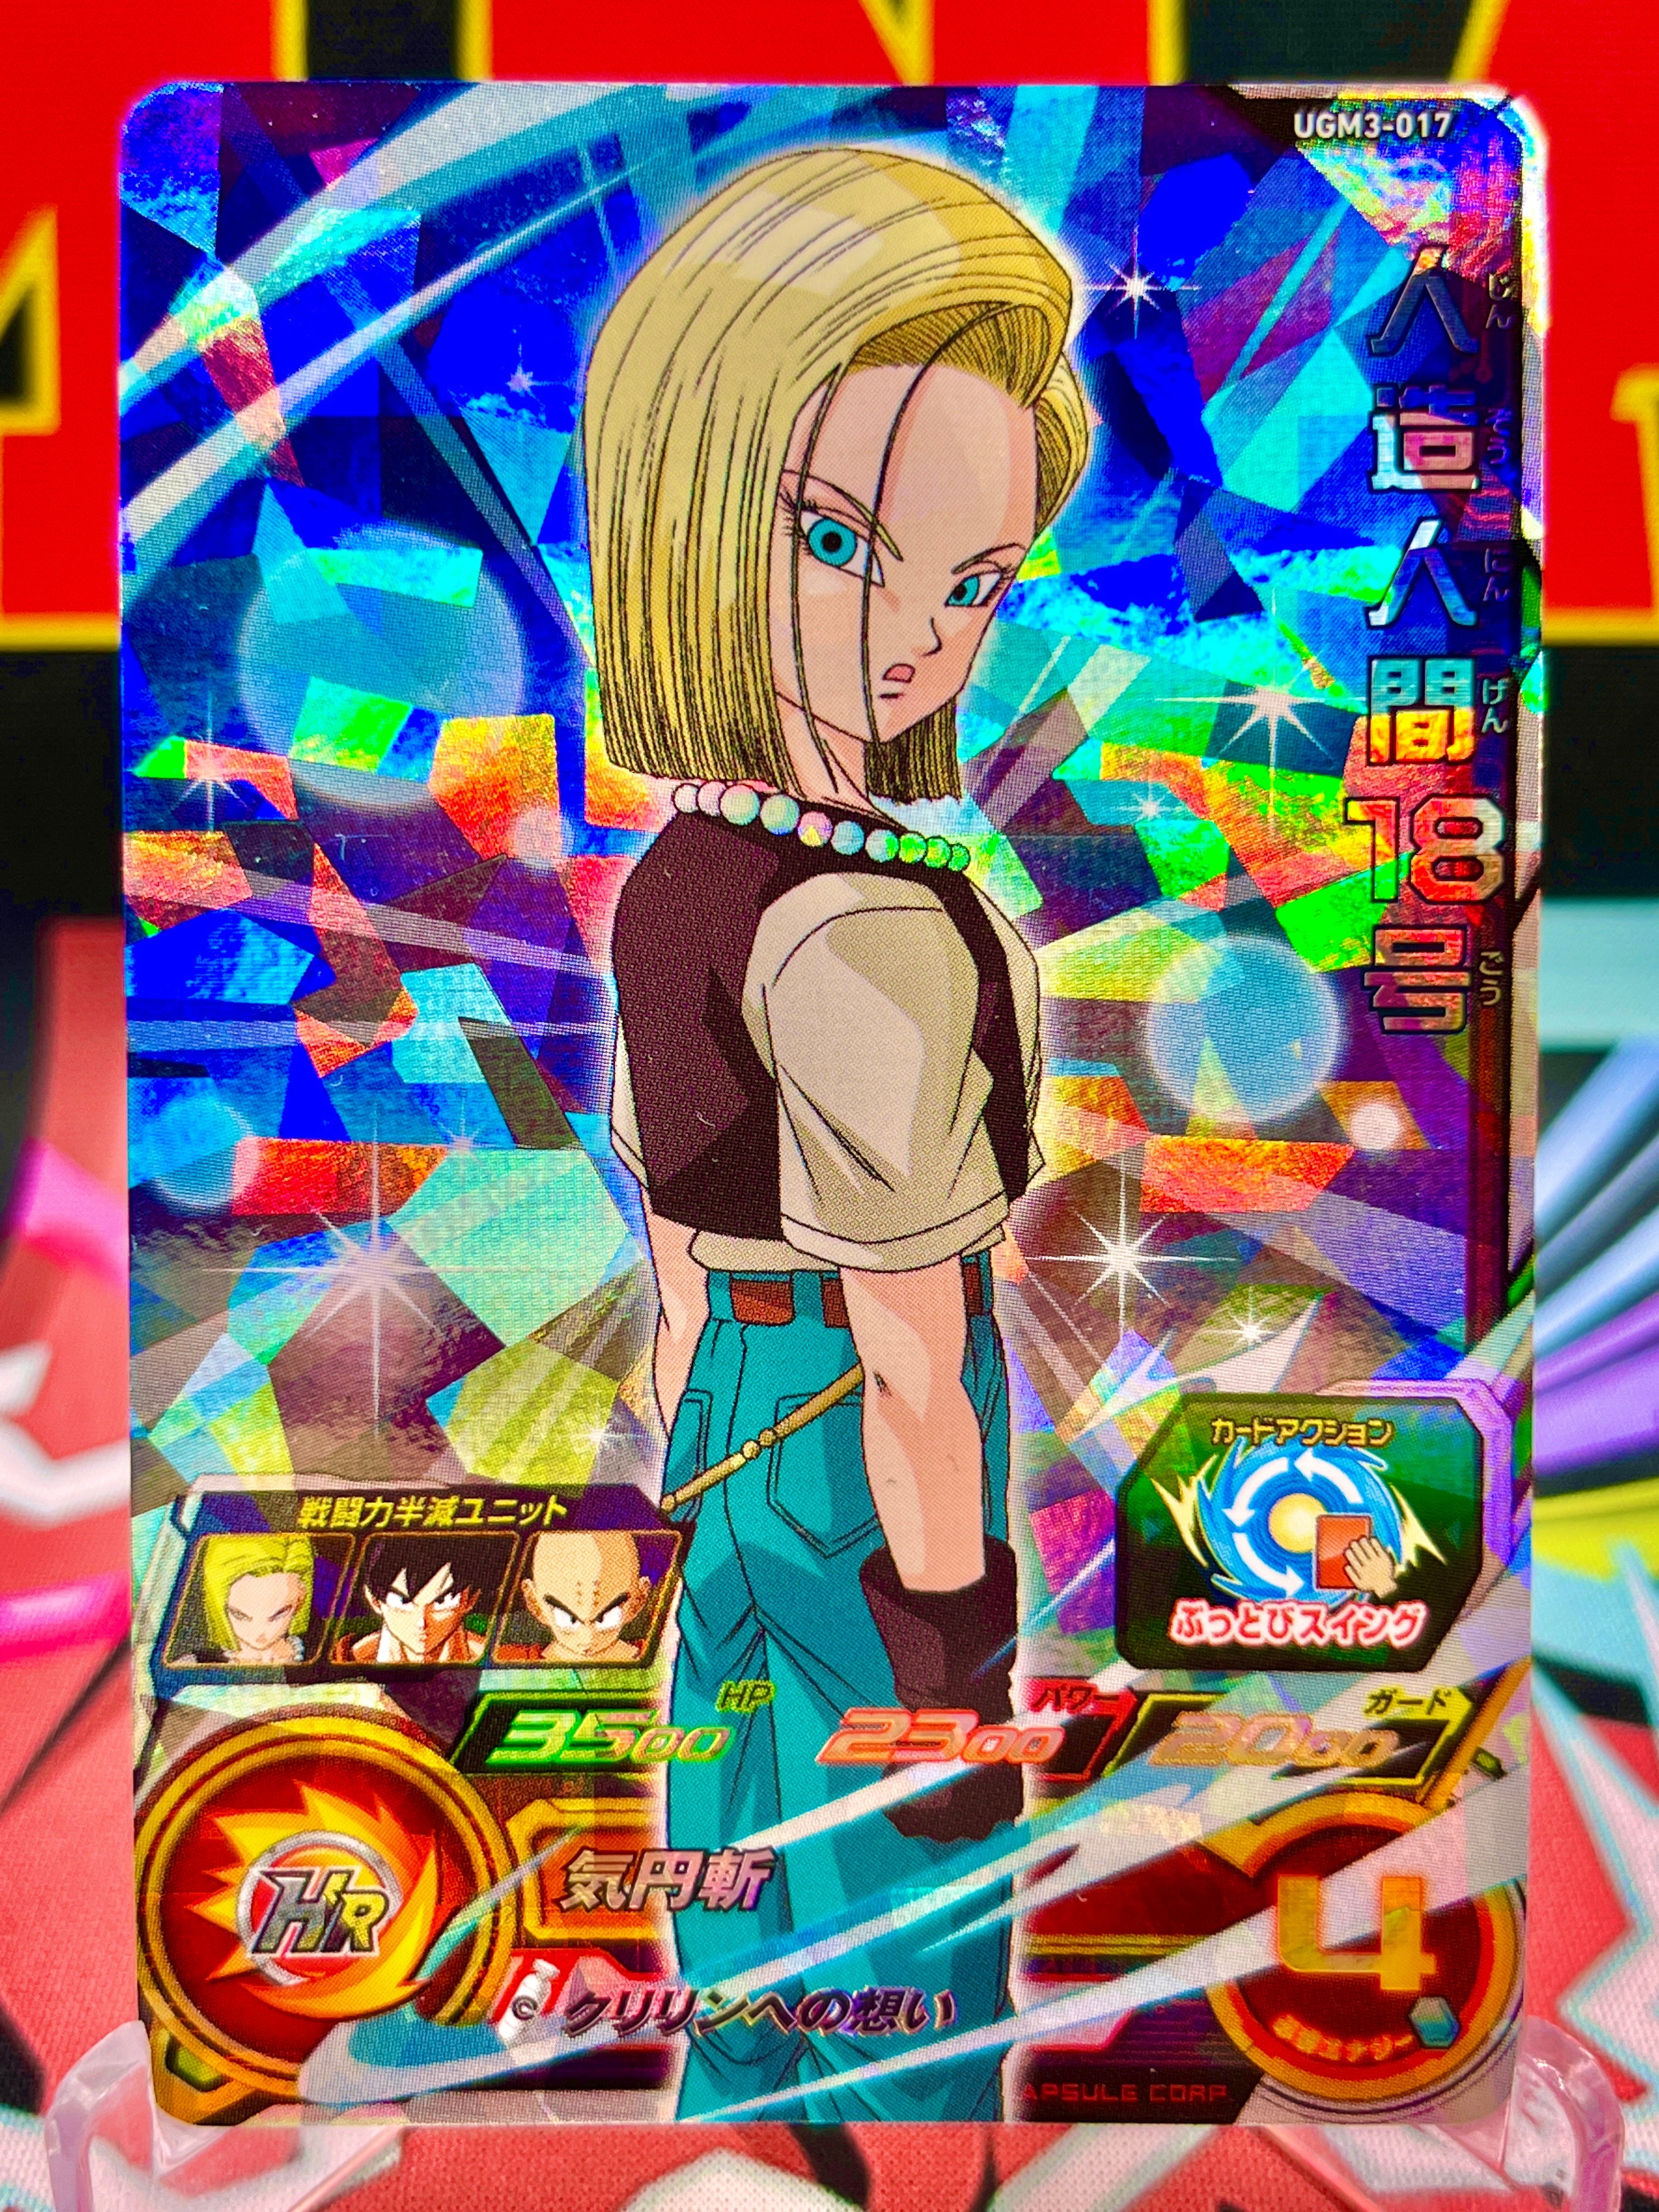 UGM3-017 Android 18 SR (2022)